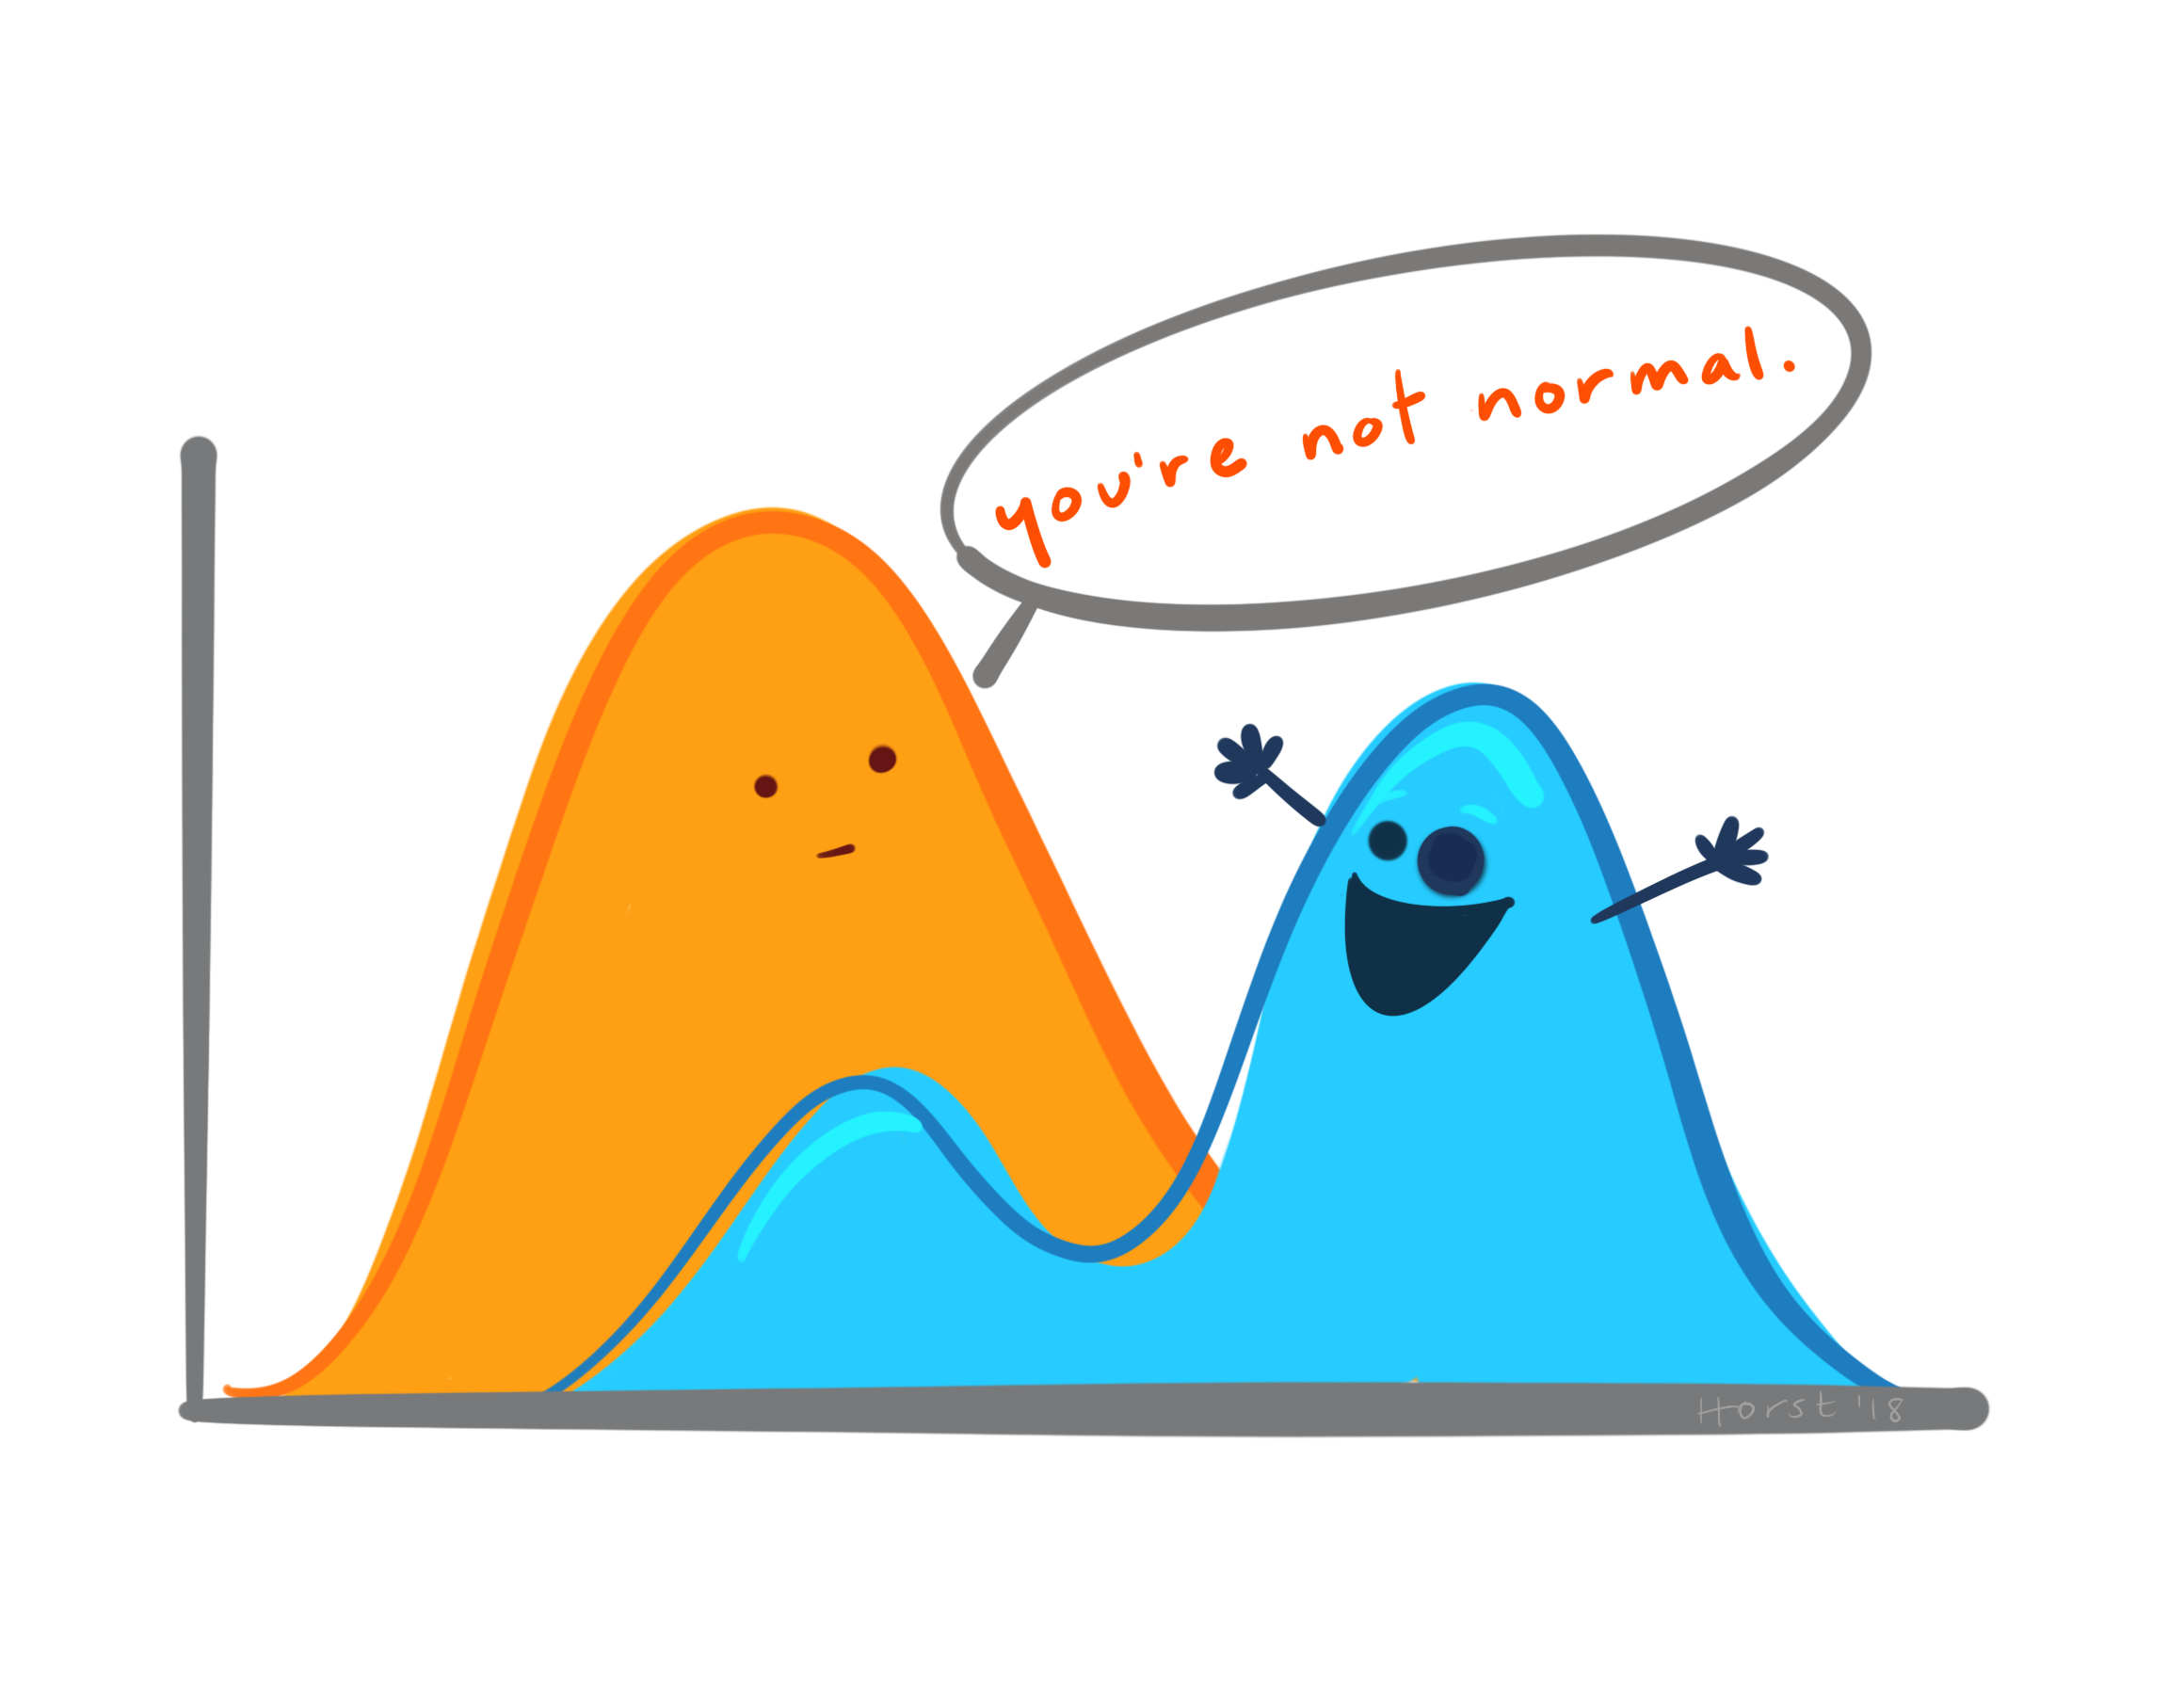 Two distributions, one is normal and the other is bimodal.